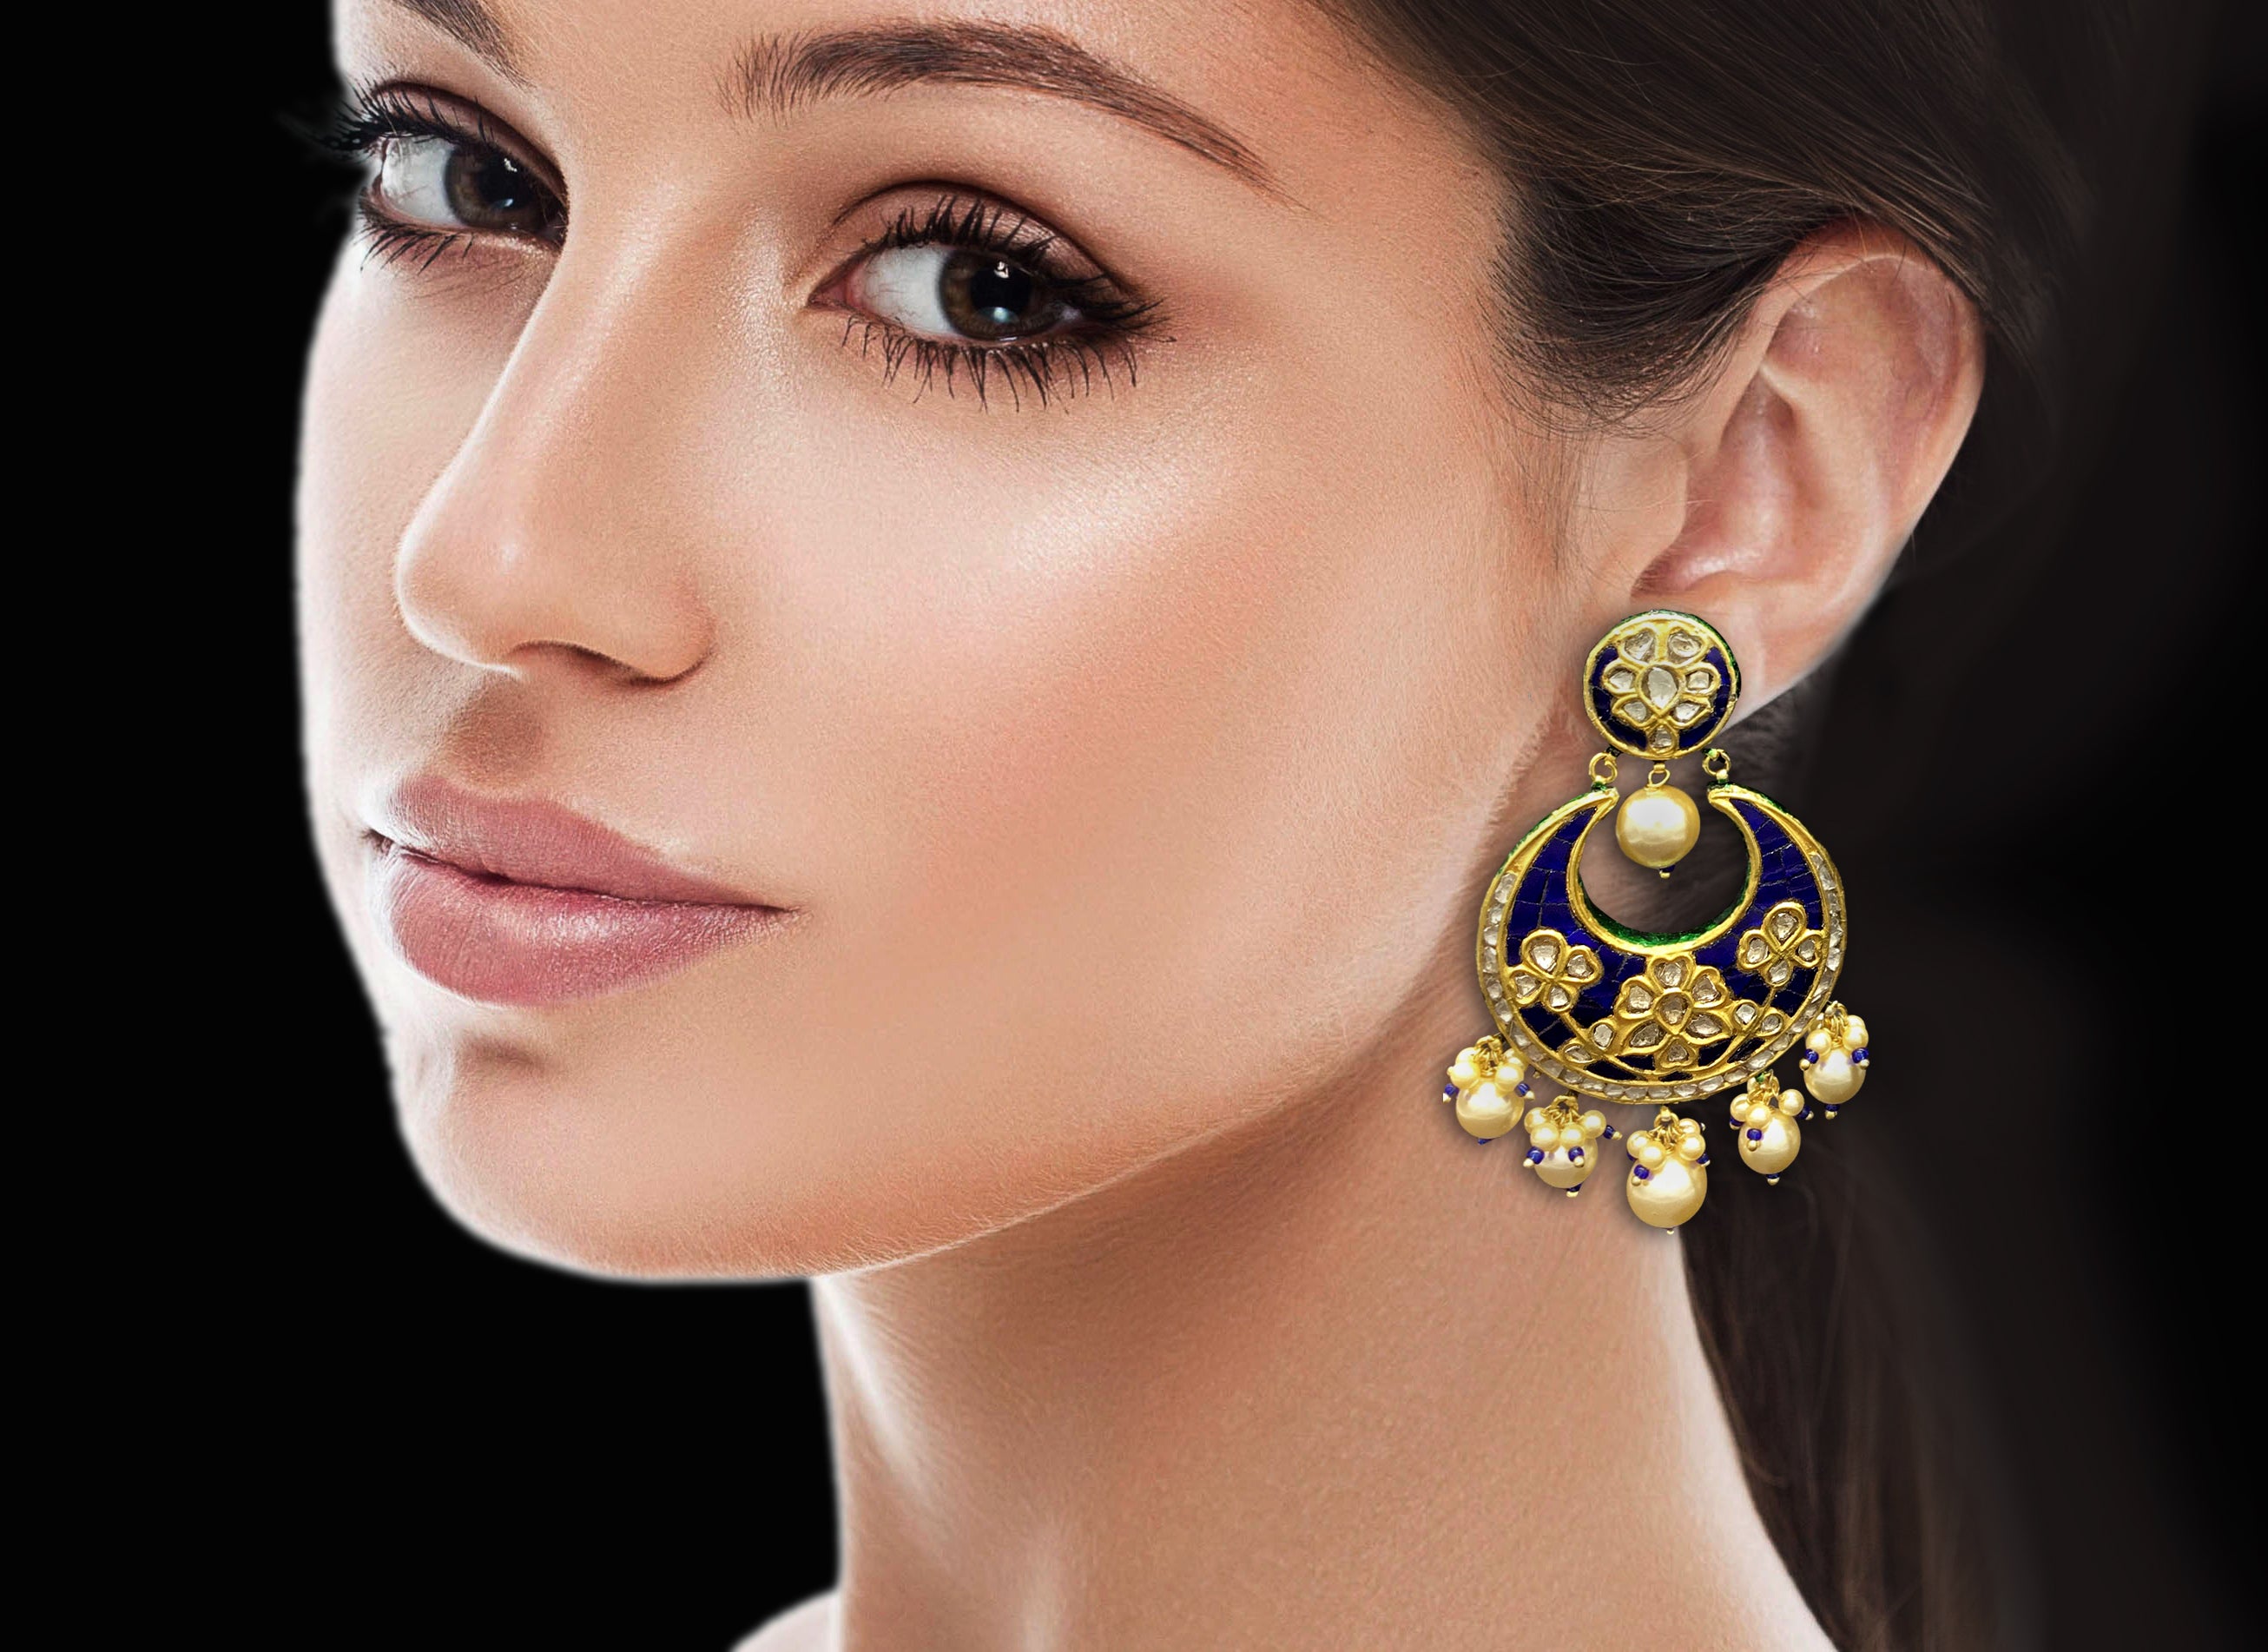 23k Gold and Diamond Polki Chand Bali Earring Pair with Blue stones set around uncuts - G. K. Ratnam